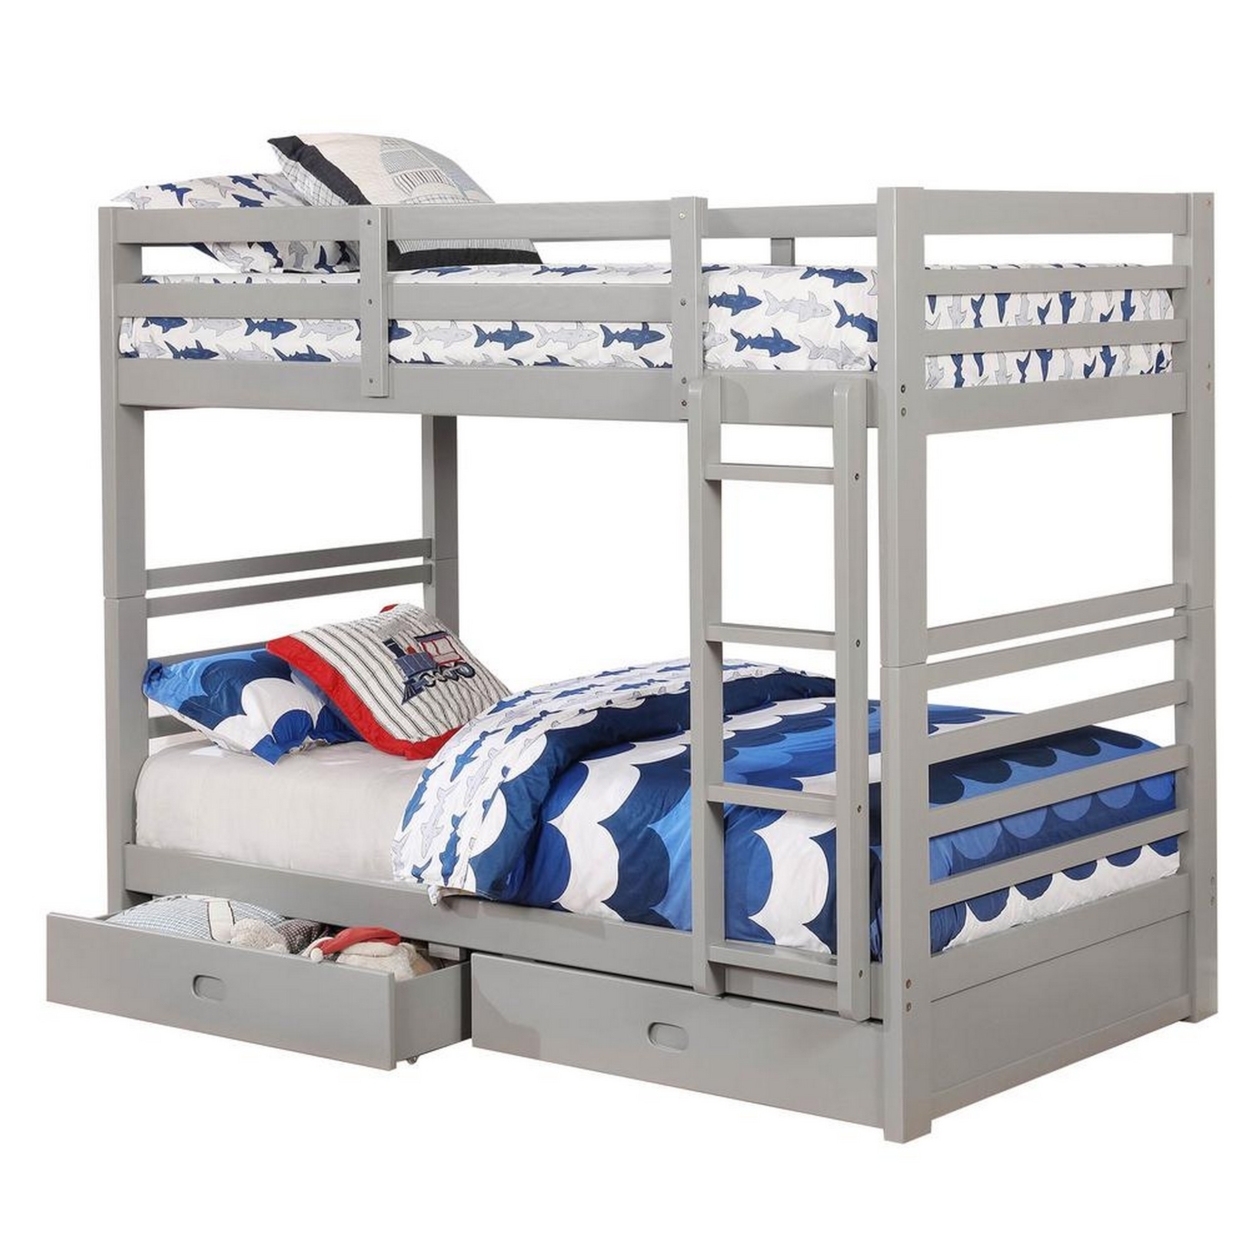 Transitional Twin Over Twin Bed With Attached Ladder And Drawers, Gray- Saltoro Sherpi